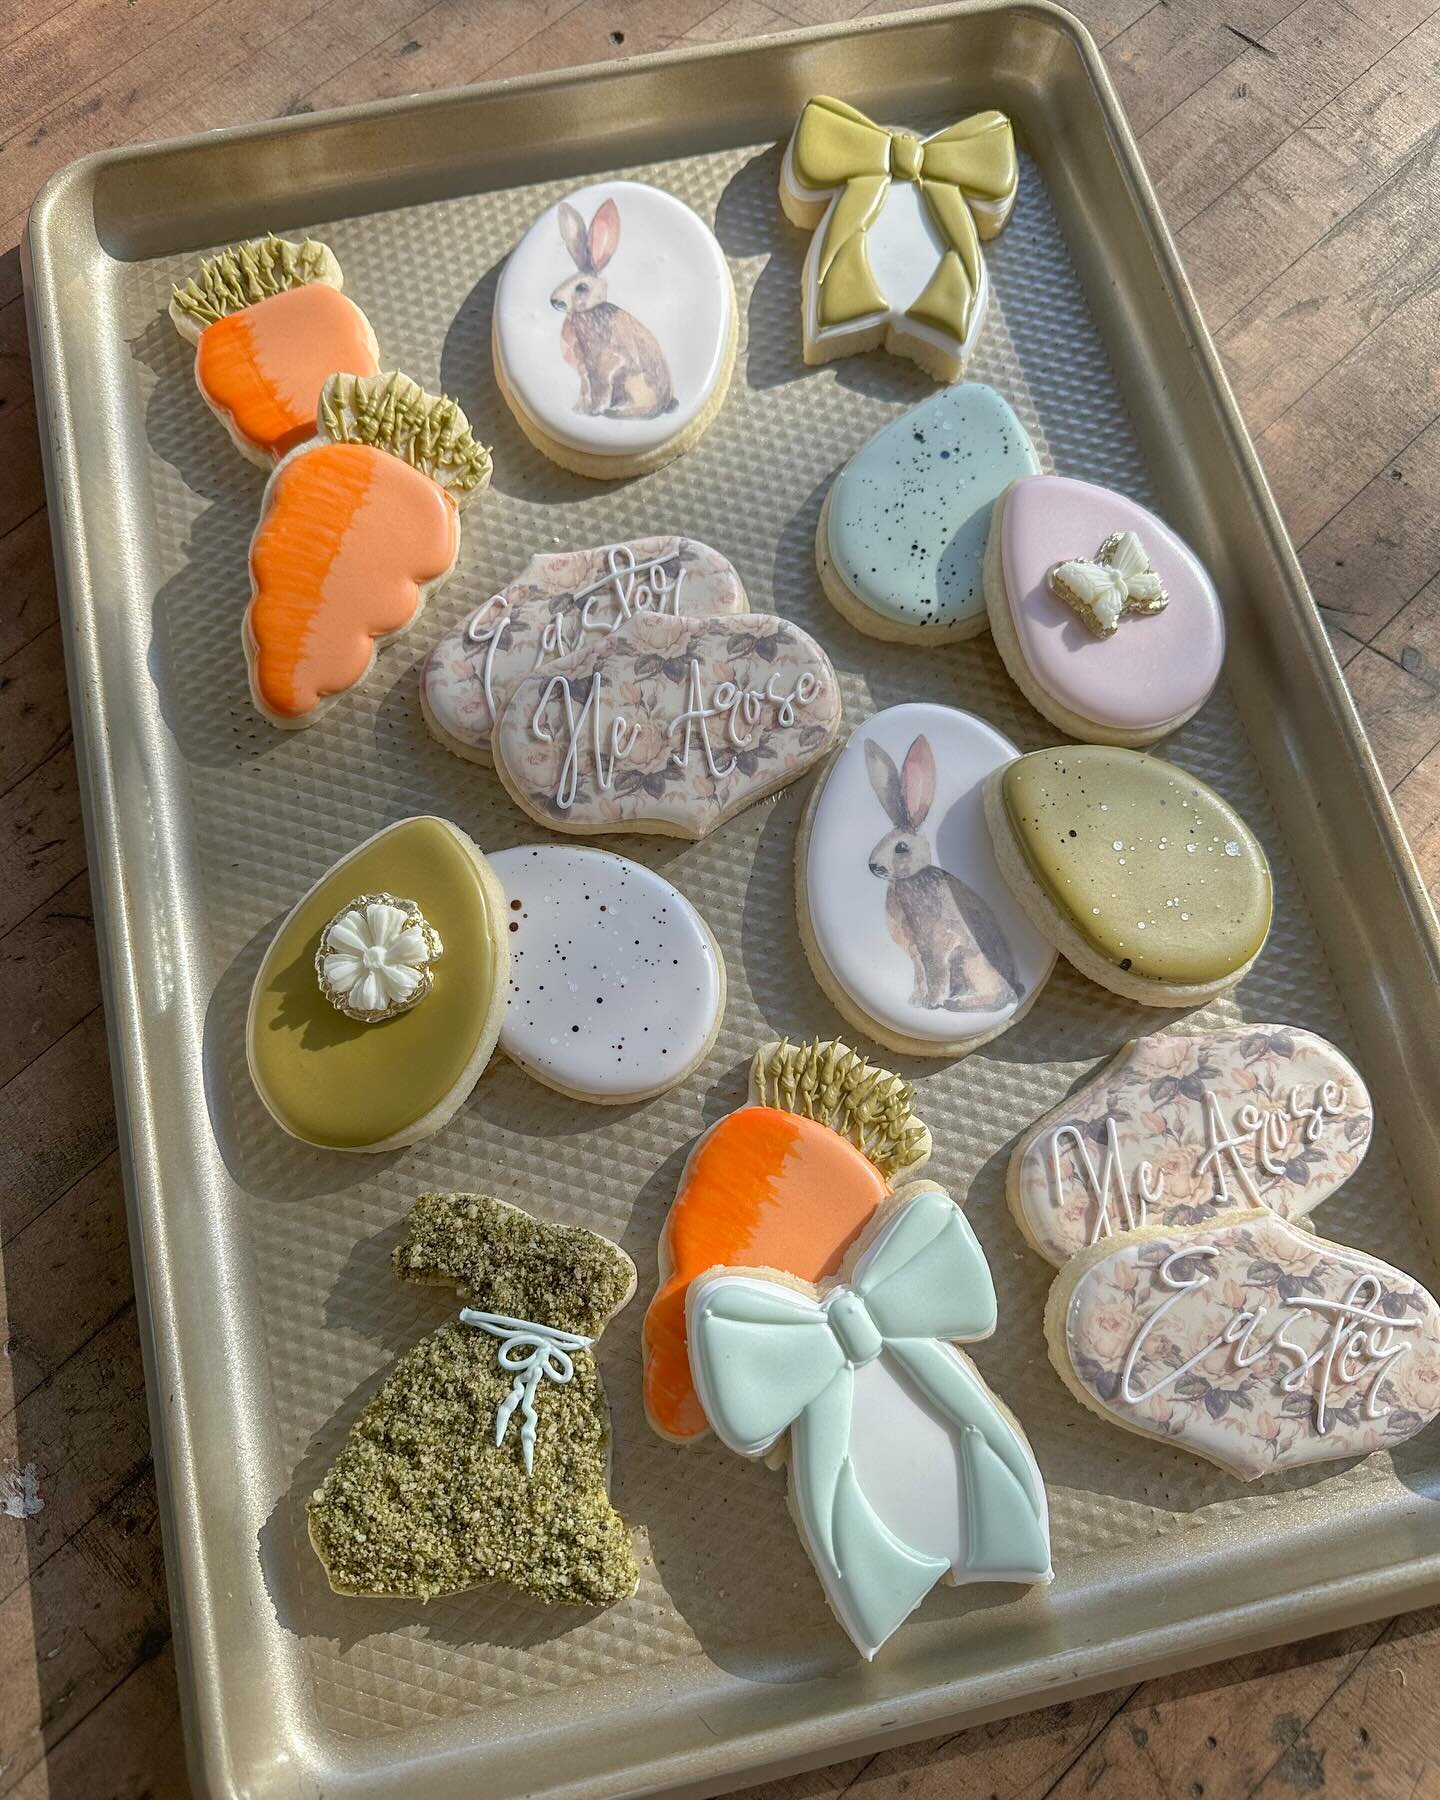 Wishing each of you a very happy Easter! 

XO,
Bessie 

#bessiebakes #customcookies #eastercookies #easter #houston #decoratedcookies #royalicing